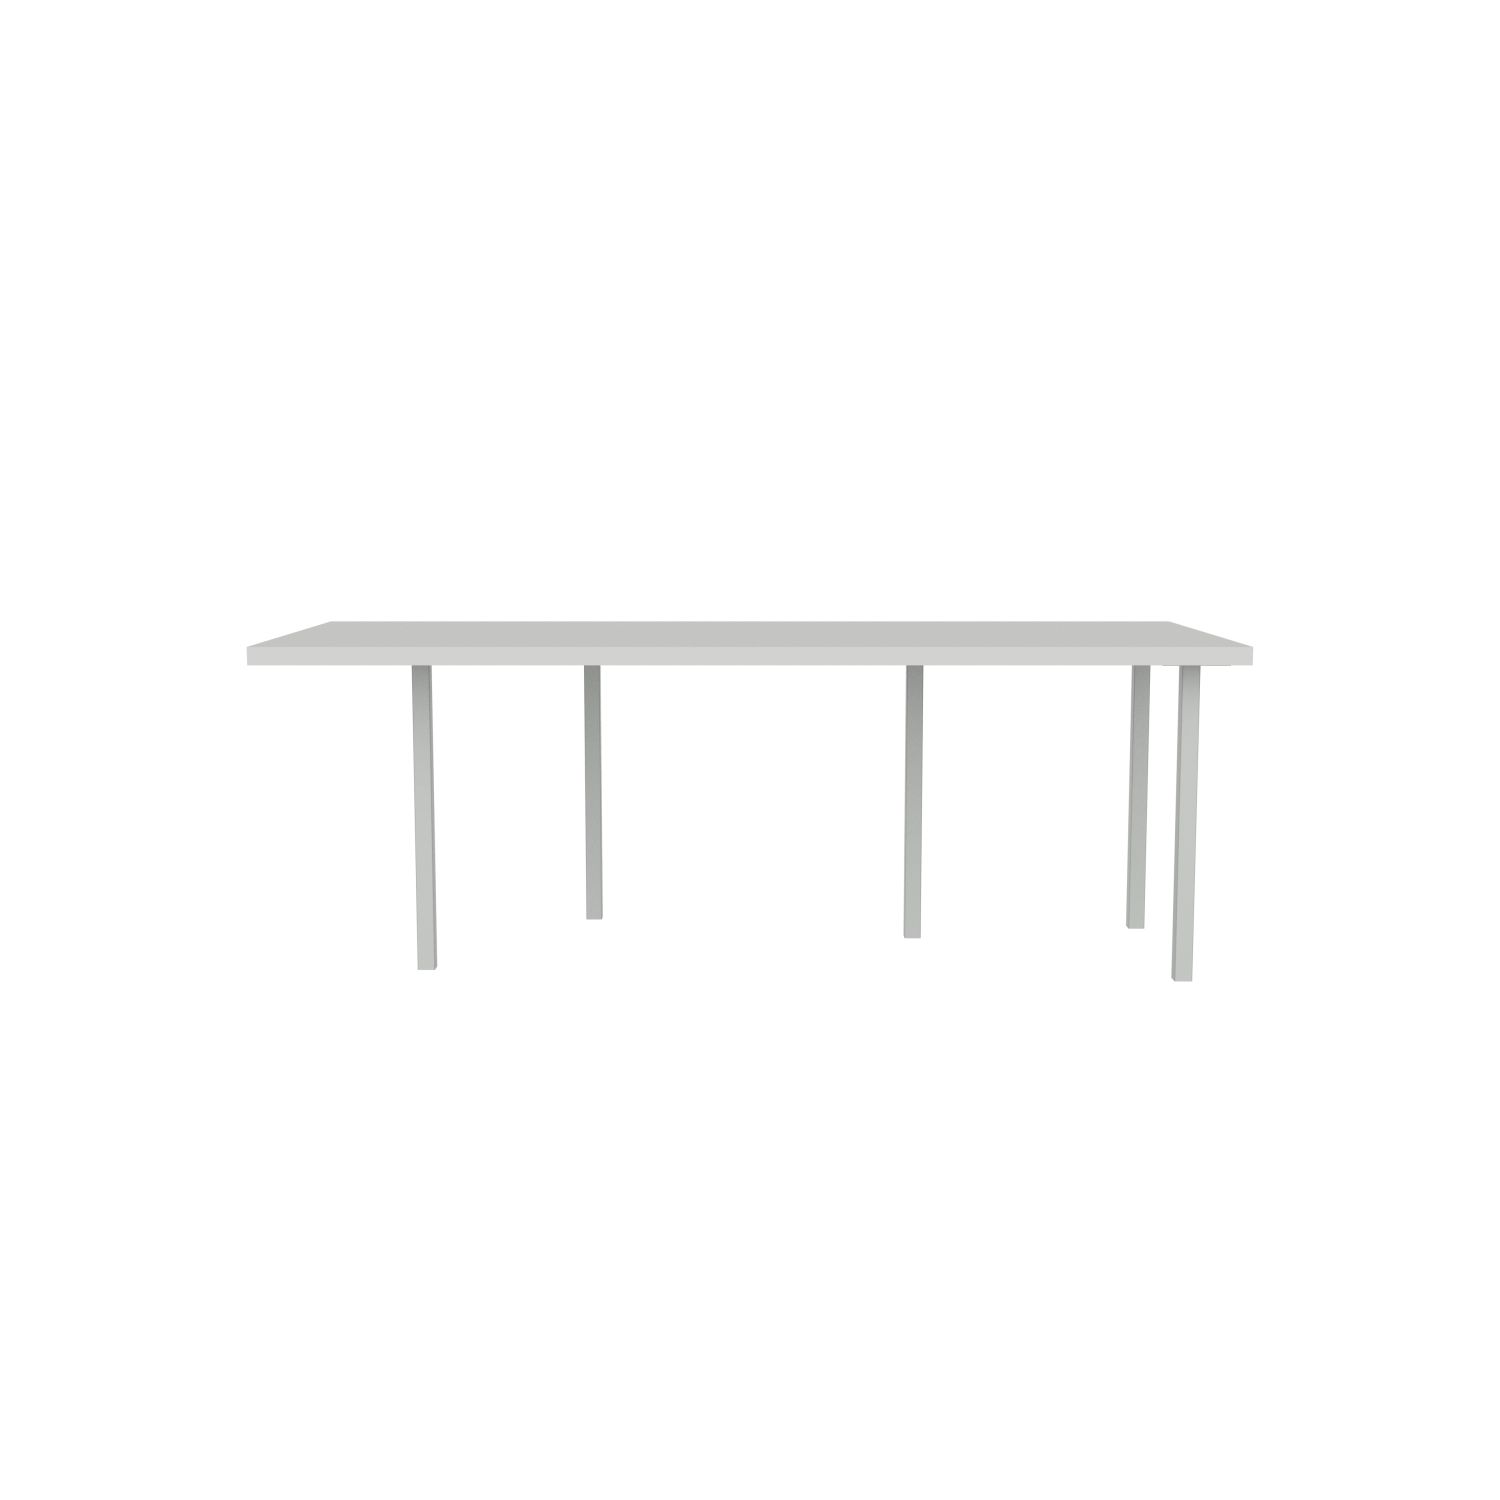 lensvelt bbrand table five fixed heigt 915x218 hpl boring grey 50 mm price level 1 light grey ral7035